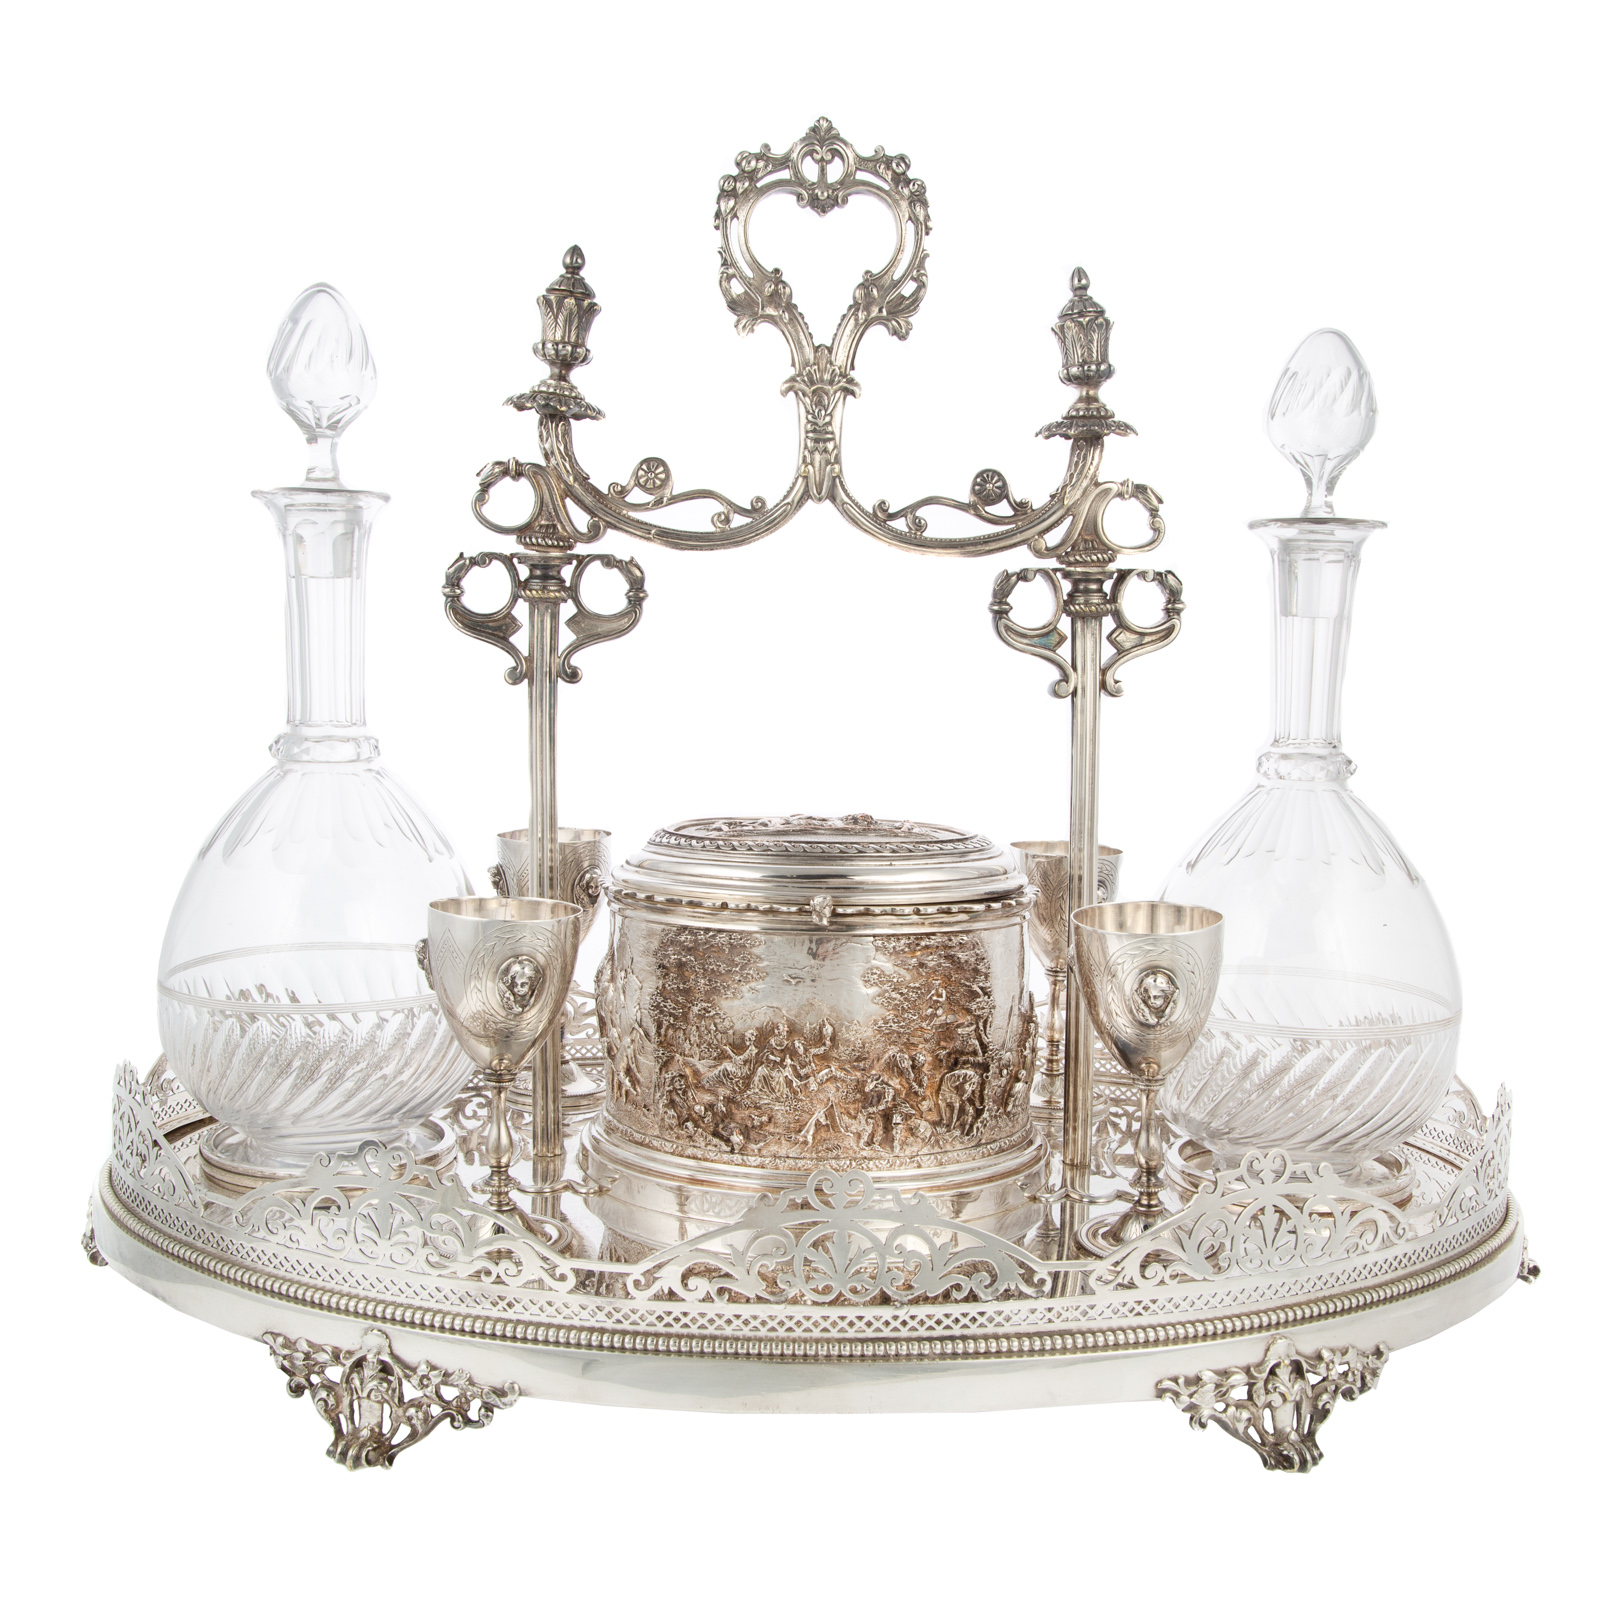 CONTINENTAL SILVER PLATED CENTERPIECE